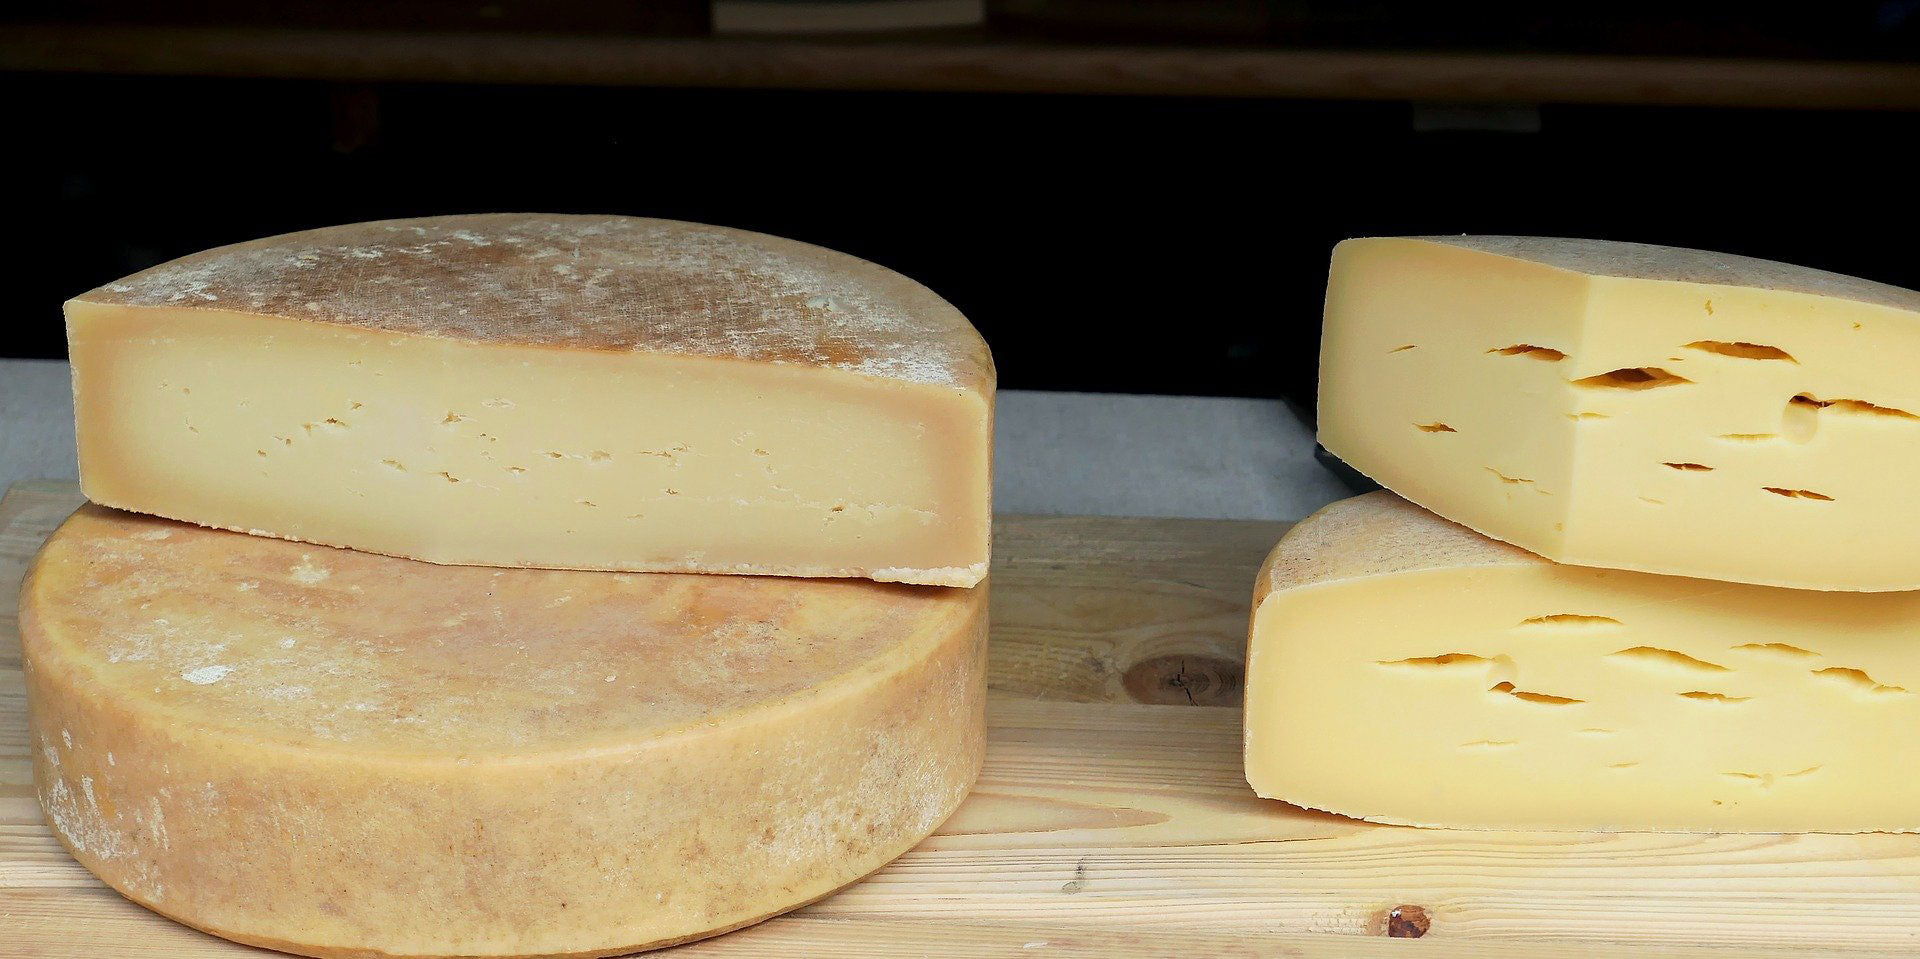 What is the ideal temperature to keep cheese fresh?